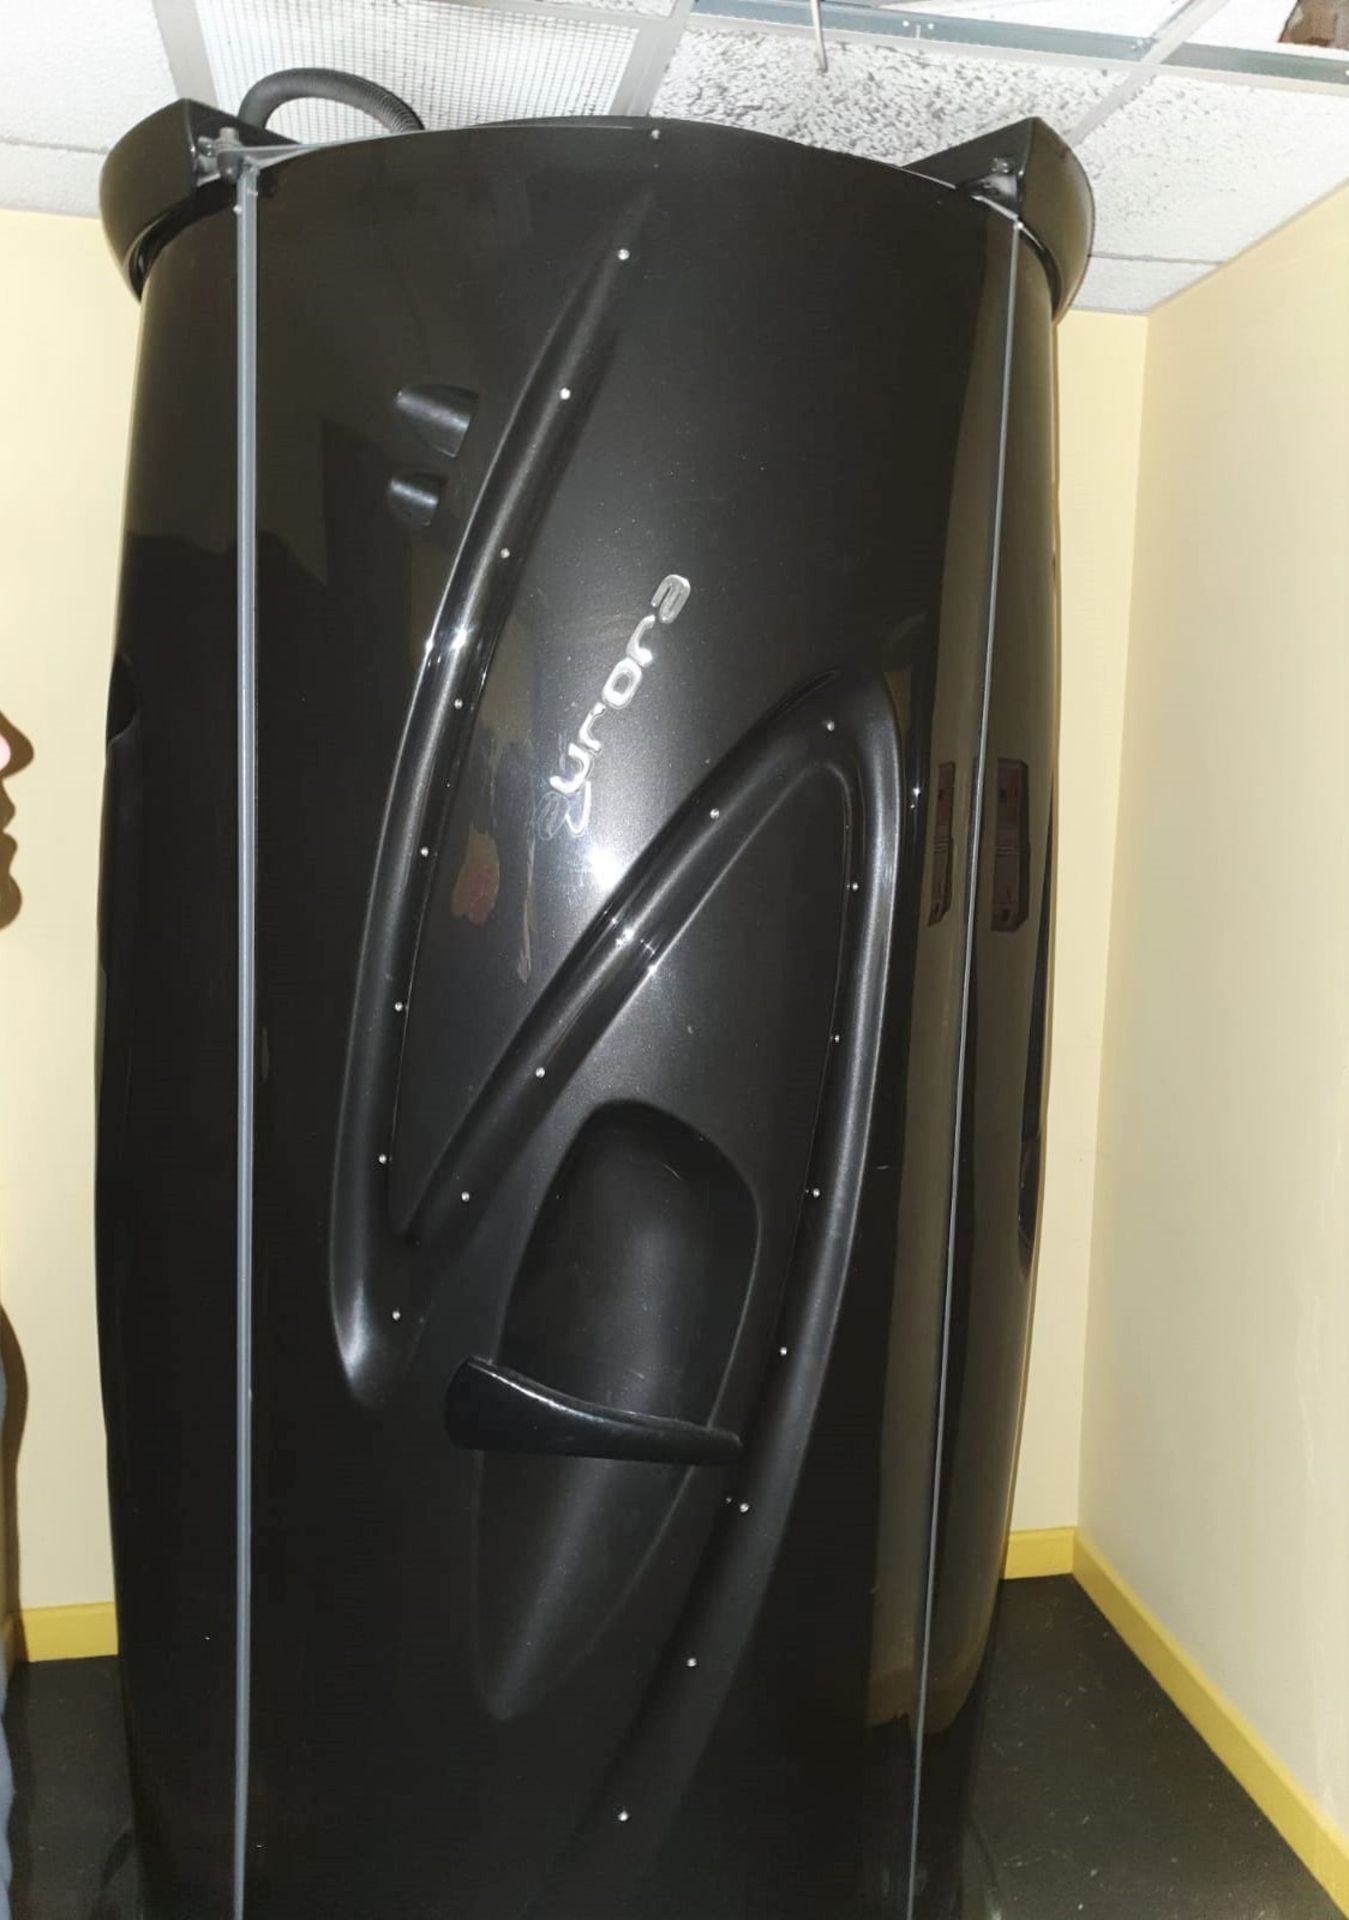 1 x Sunquest Aurora Vertical Tanning Unit Sunbed With Token Meter - Approx Dimensions 270 x 110 x